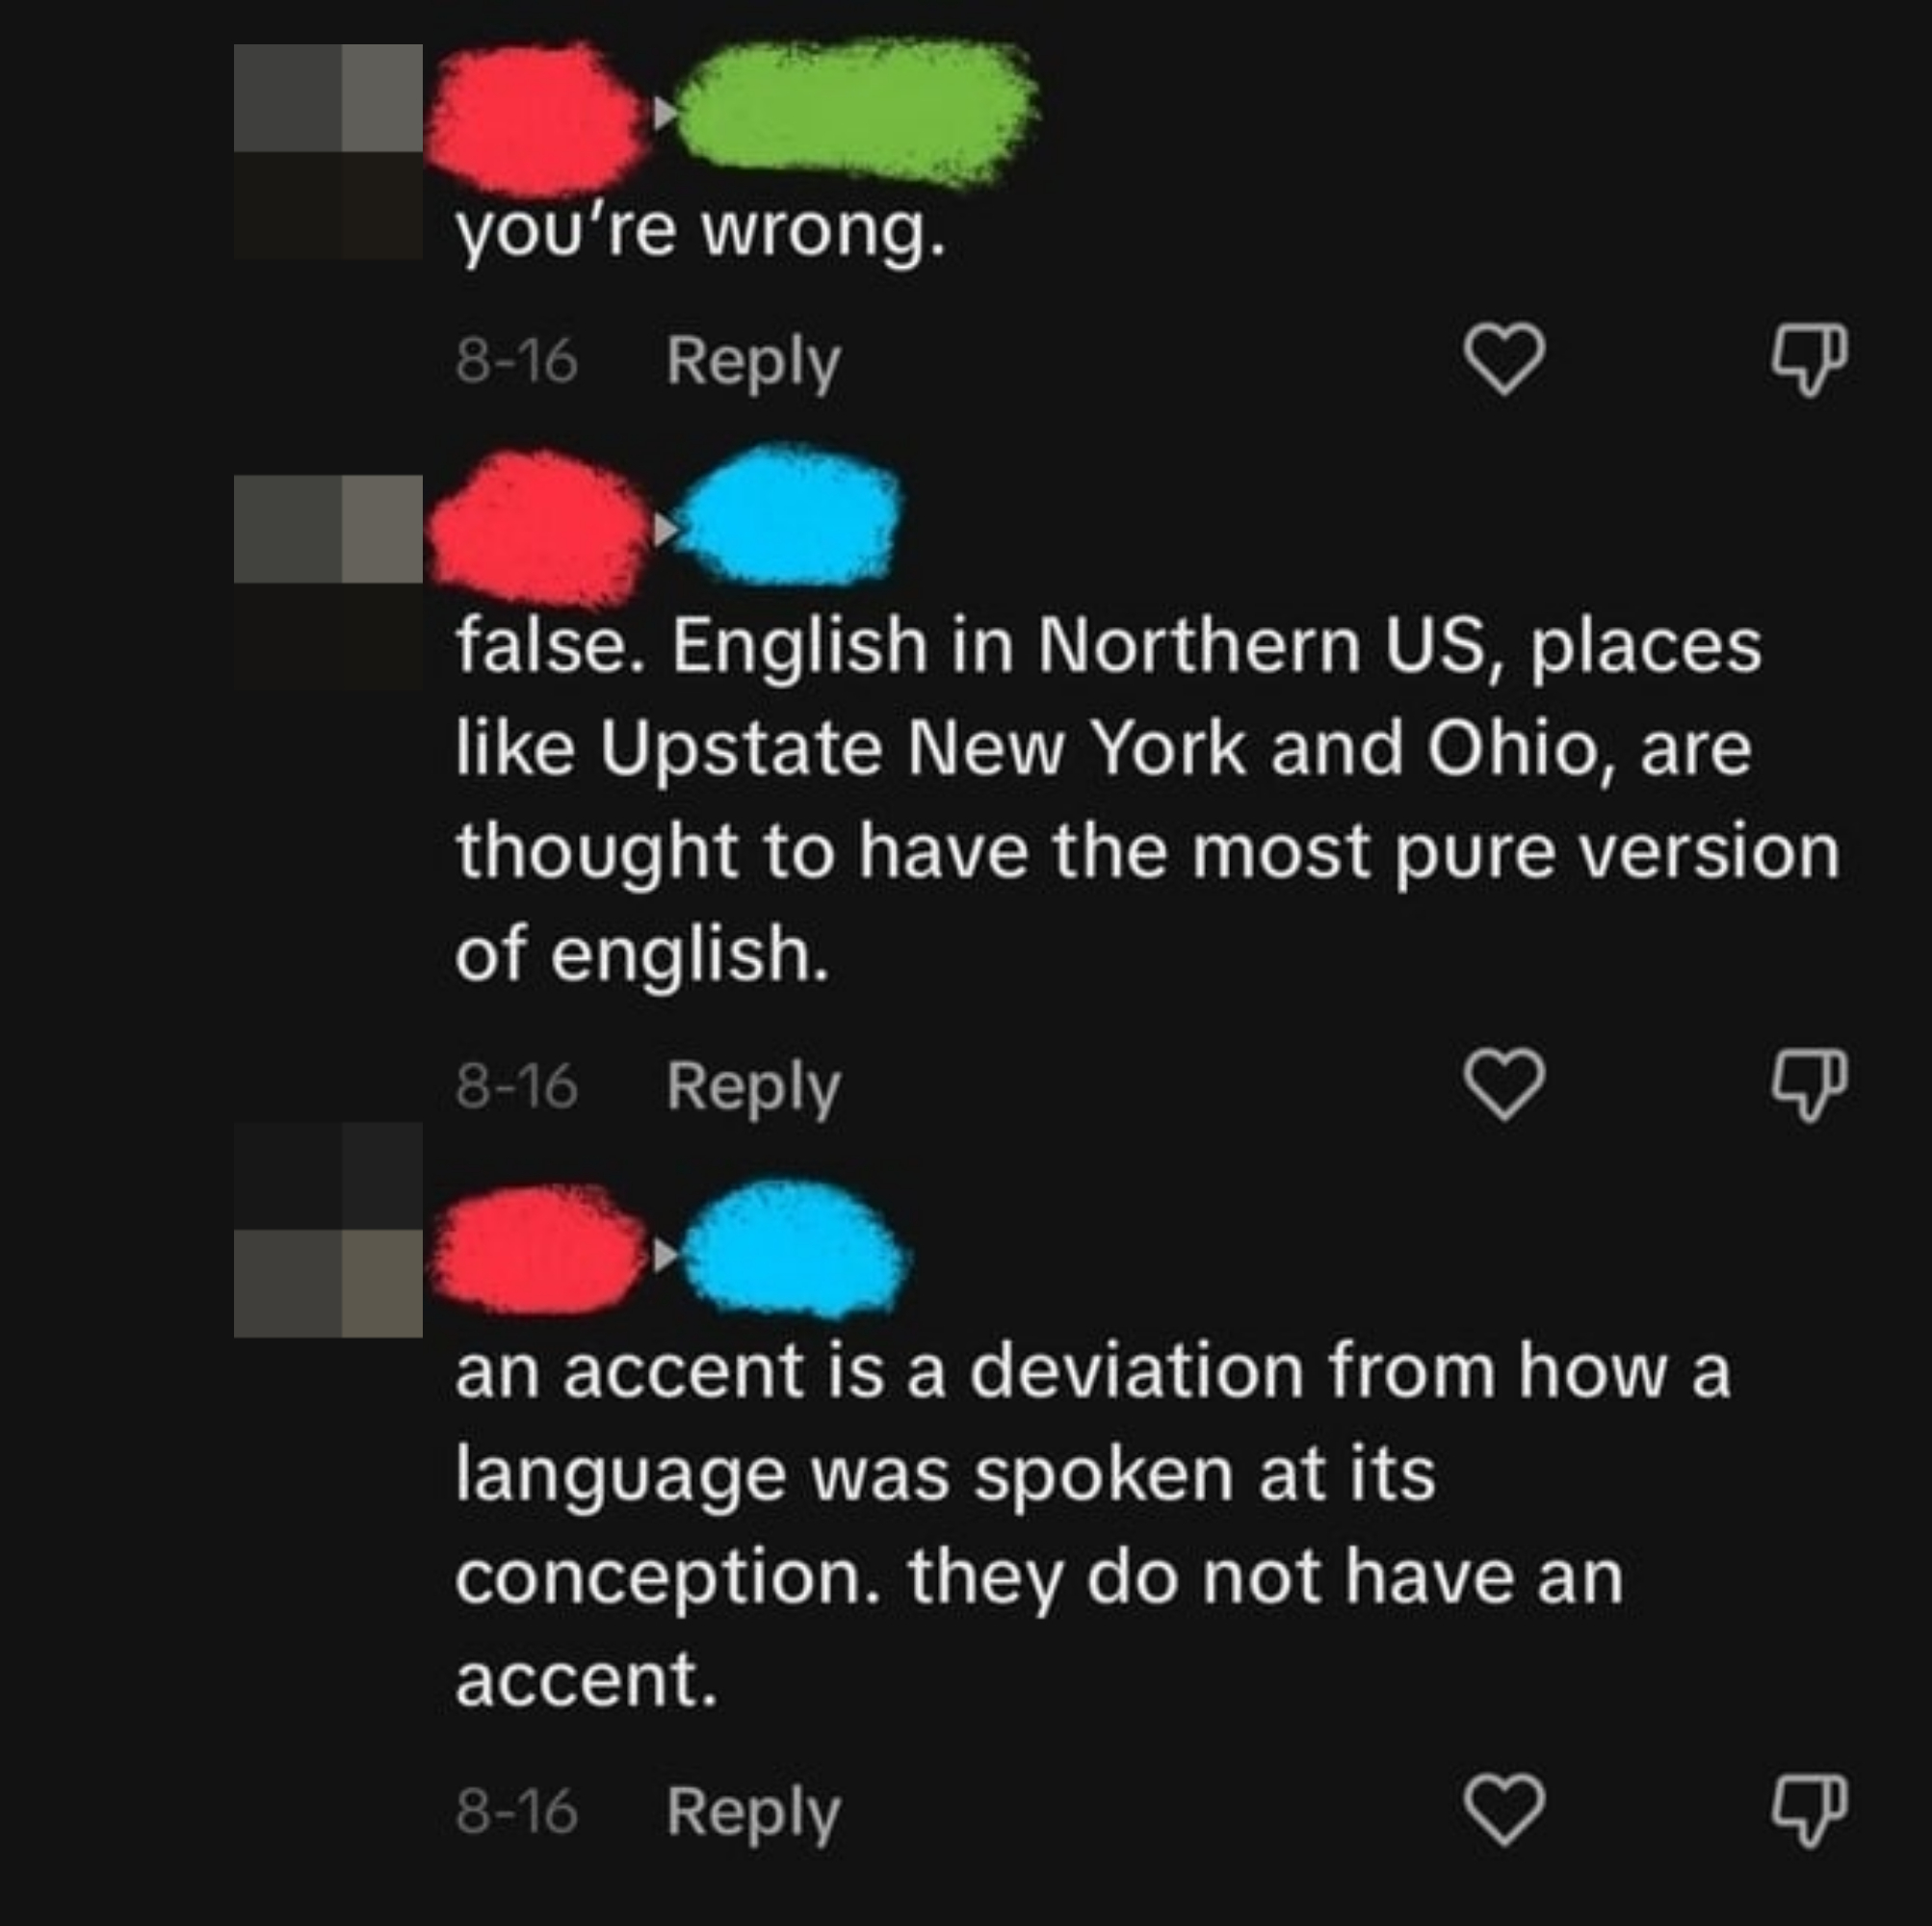 &quot;they do not have an accent.&quot;